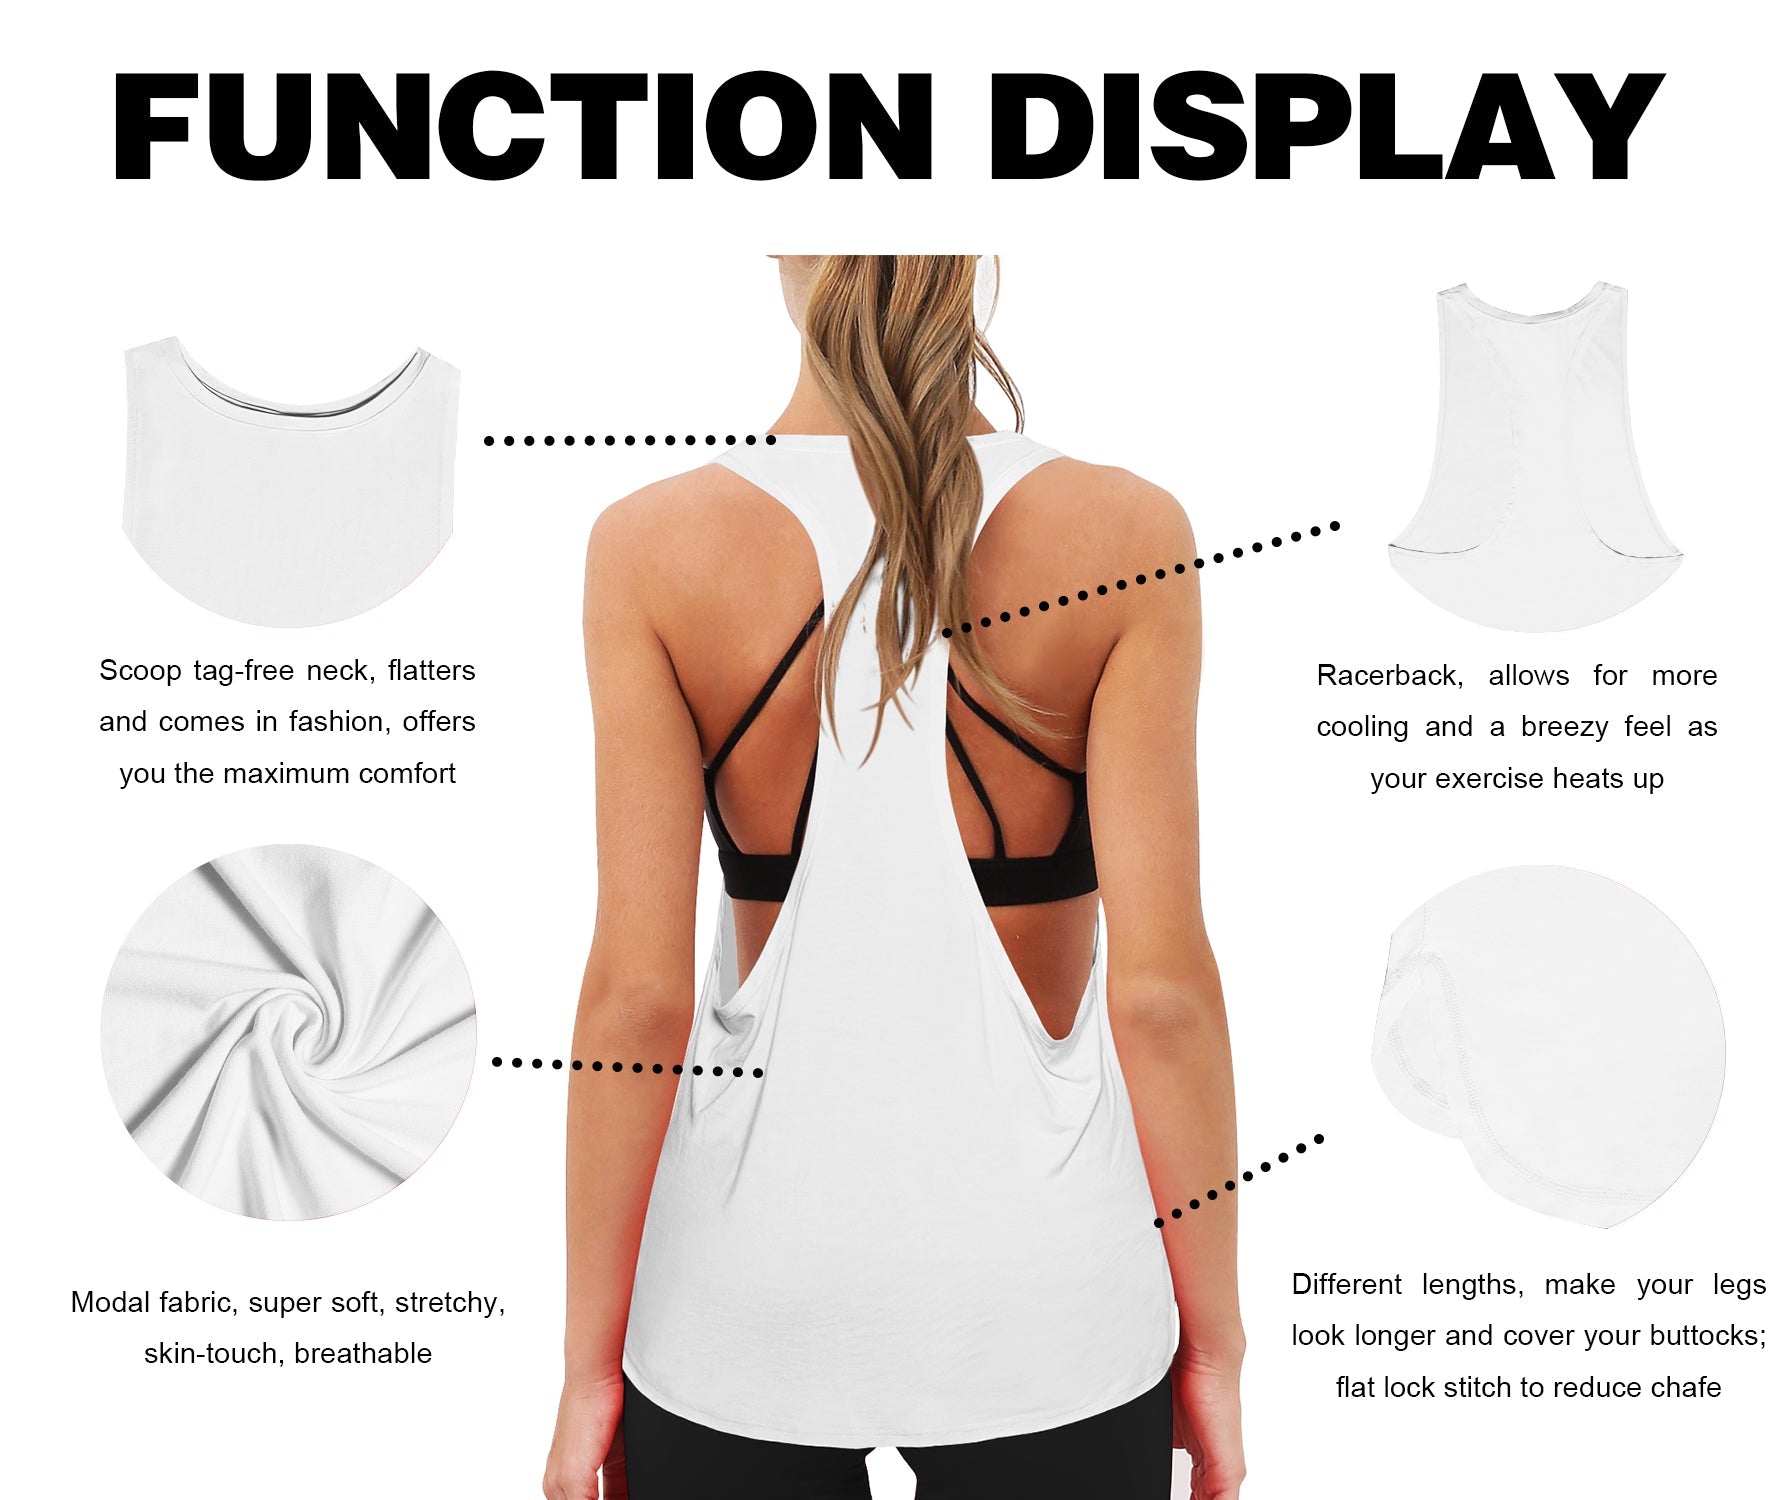 Low Cut Loose Fit Tank Top white Designed for On the Move Loose fit 93%Modal/7%Spandex Four-way stretch Naturally breathable Super-Soft, Modal Fabric